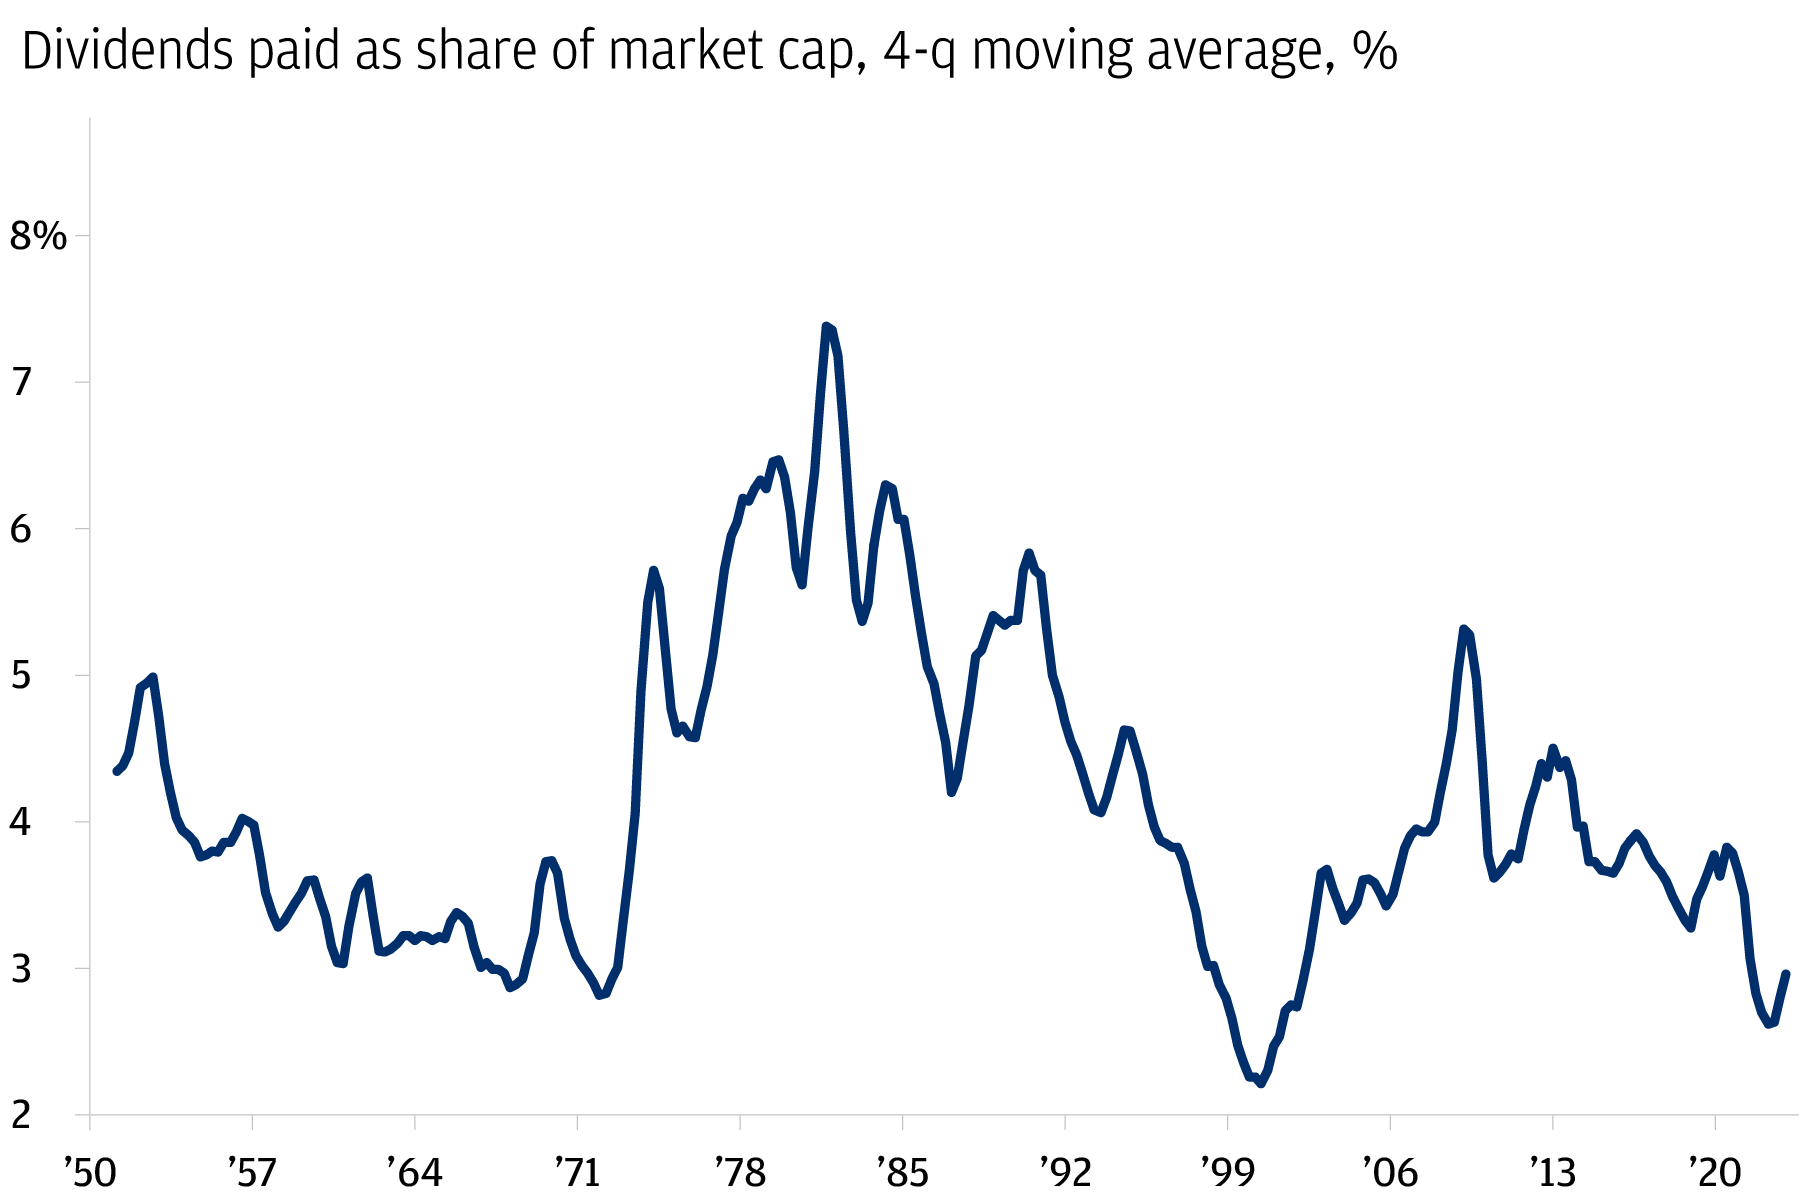 The chart is about the 4-quarter moving average of dividends paid as share of market cap. 